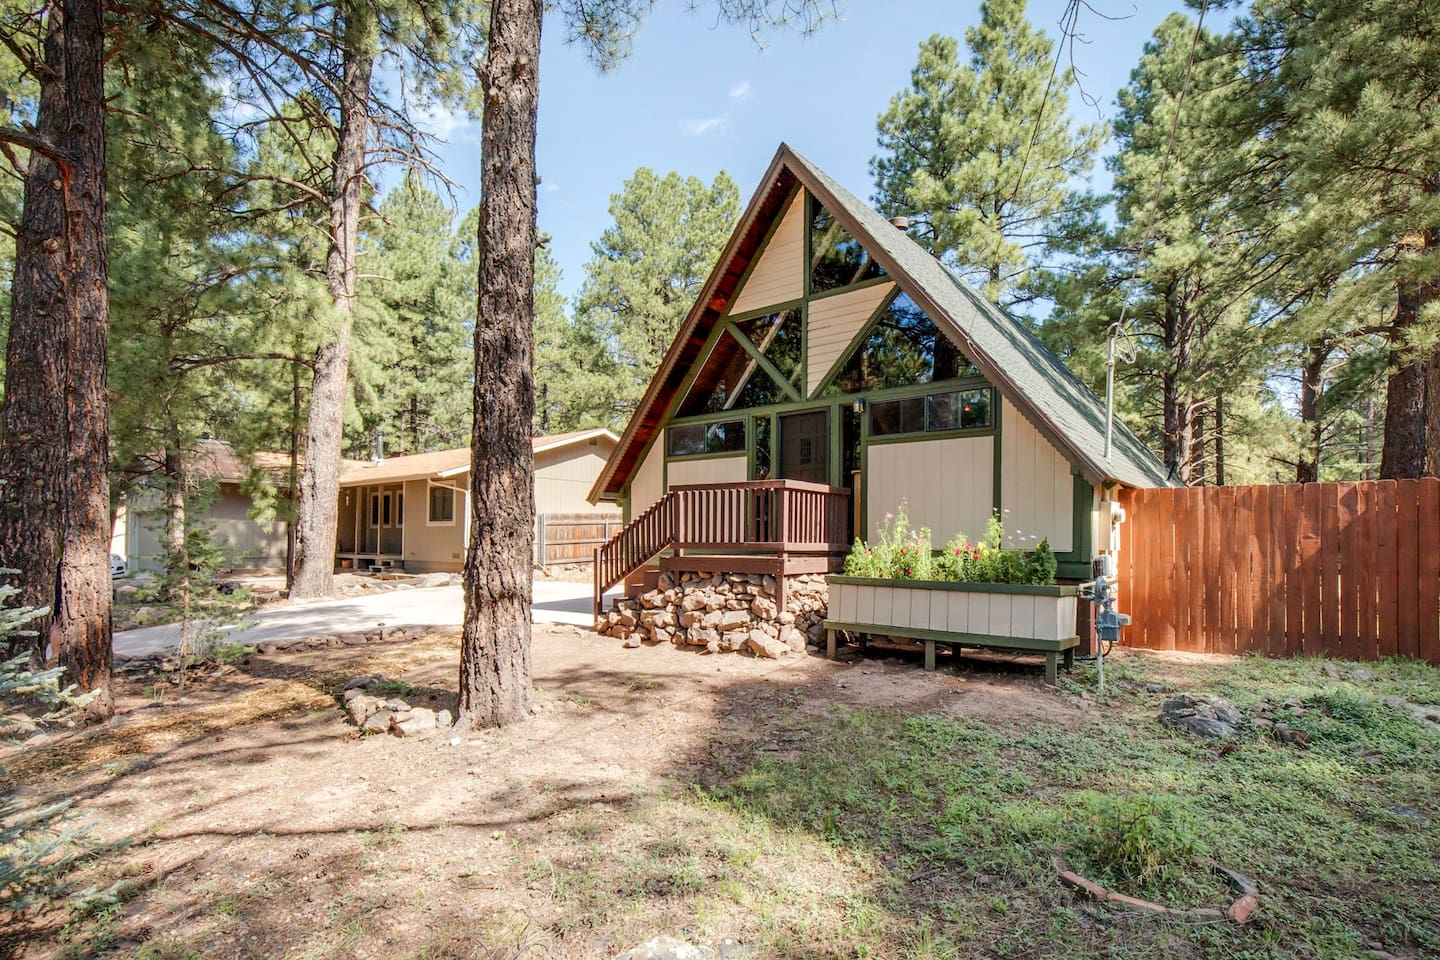 The 13 Pines Triangle House is one of the 15 best Airbnbs in Flagstaff